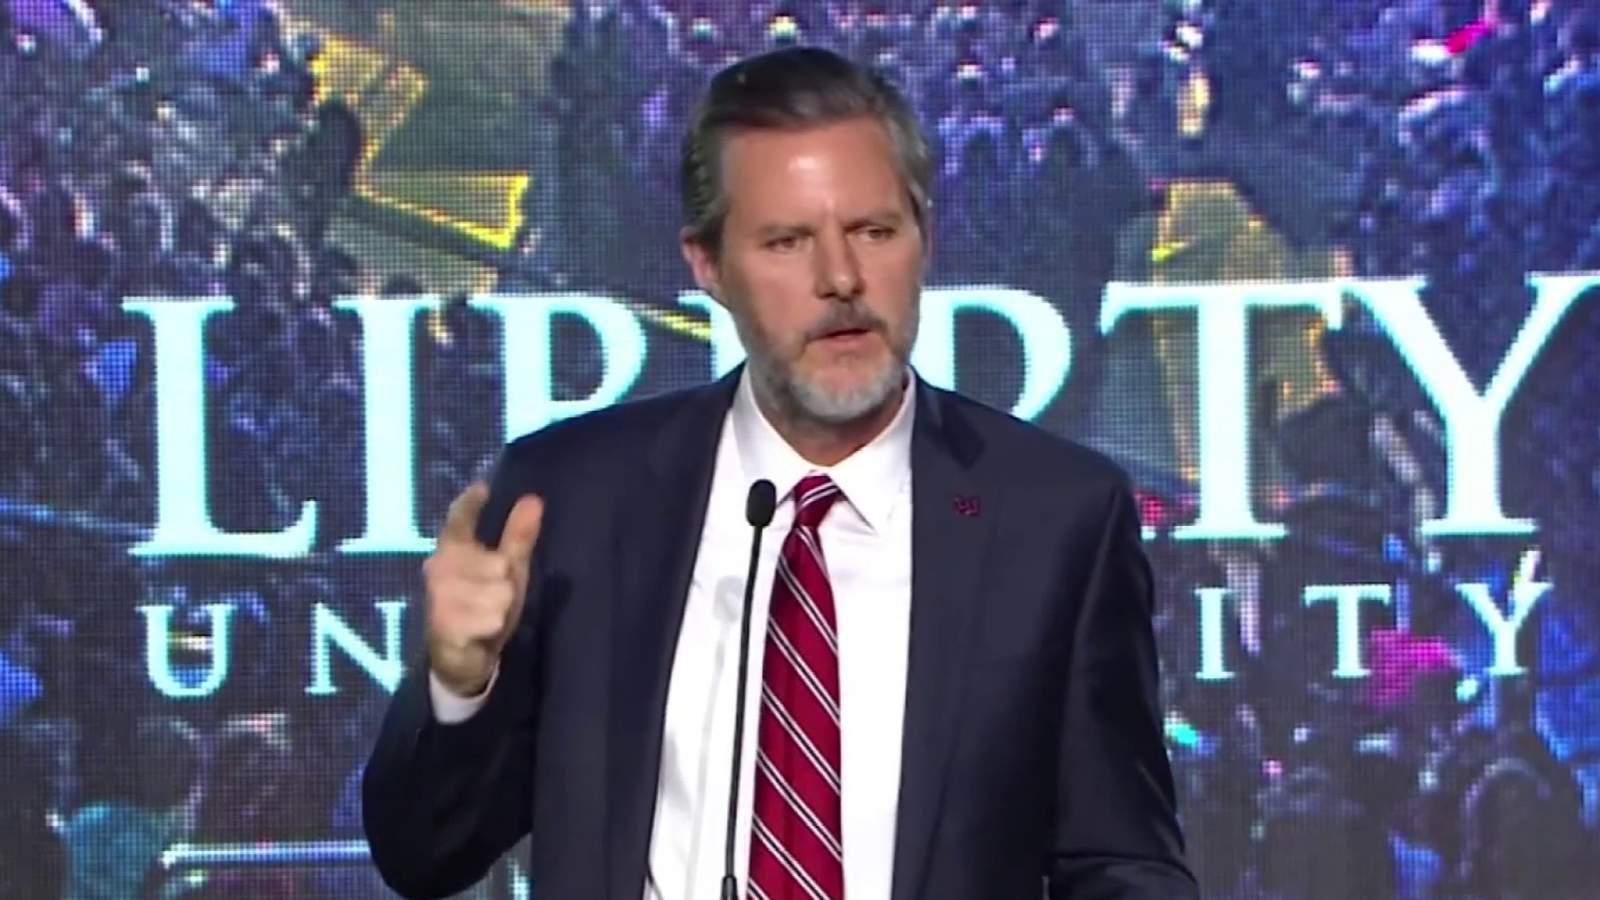 WP: Jerry Falwell Jr. to get $10.5 million in severance, retirement